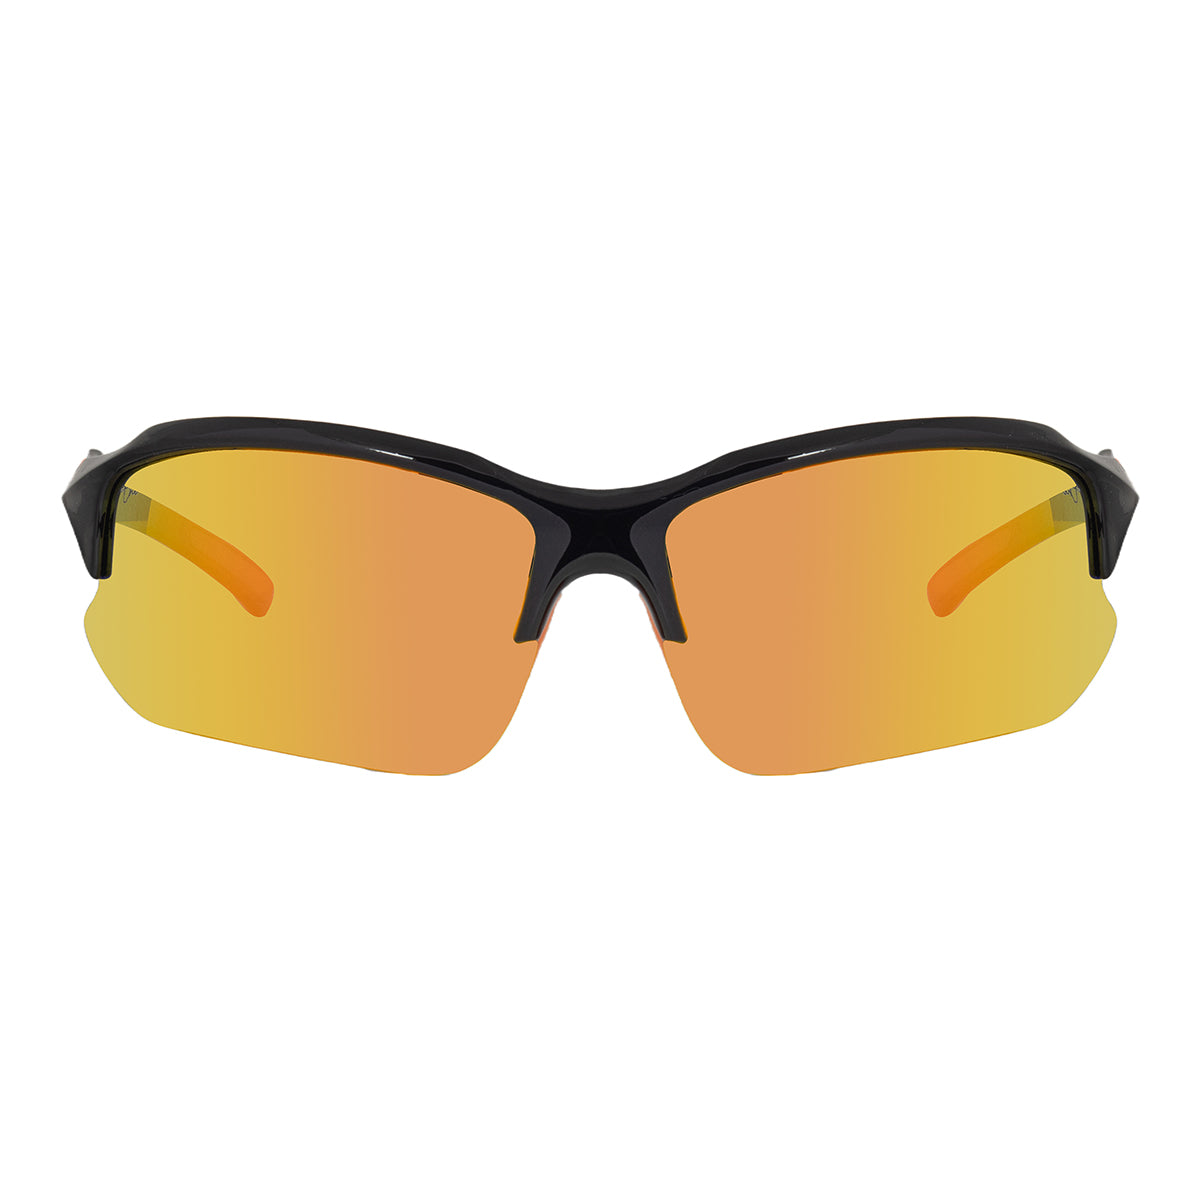 Aceviner Active Sunglasses (Polarized Protection)